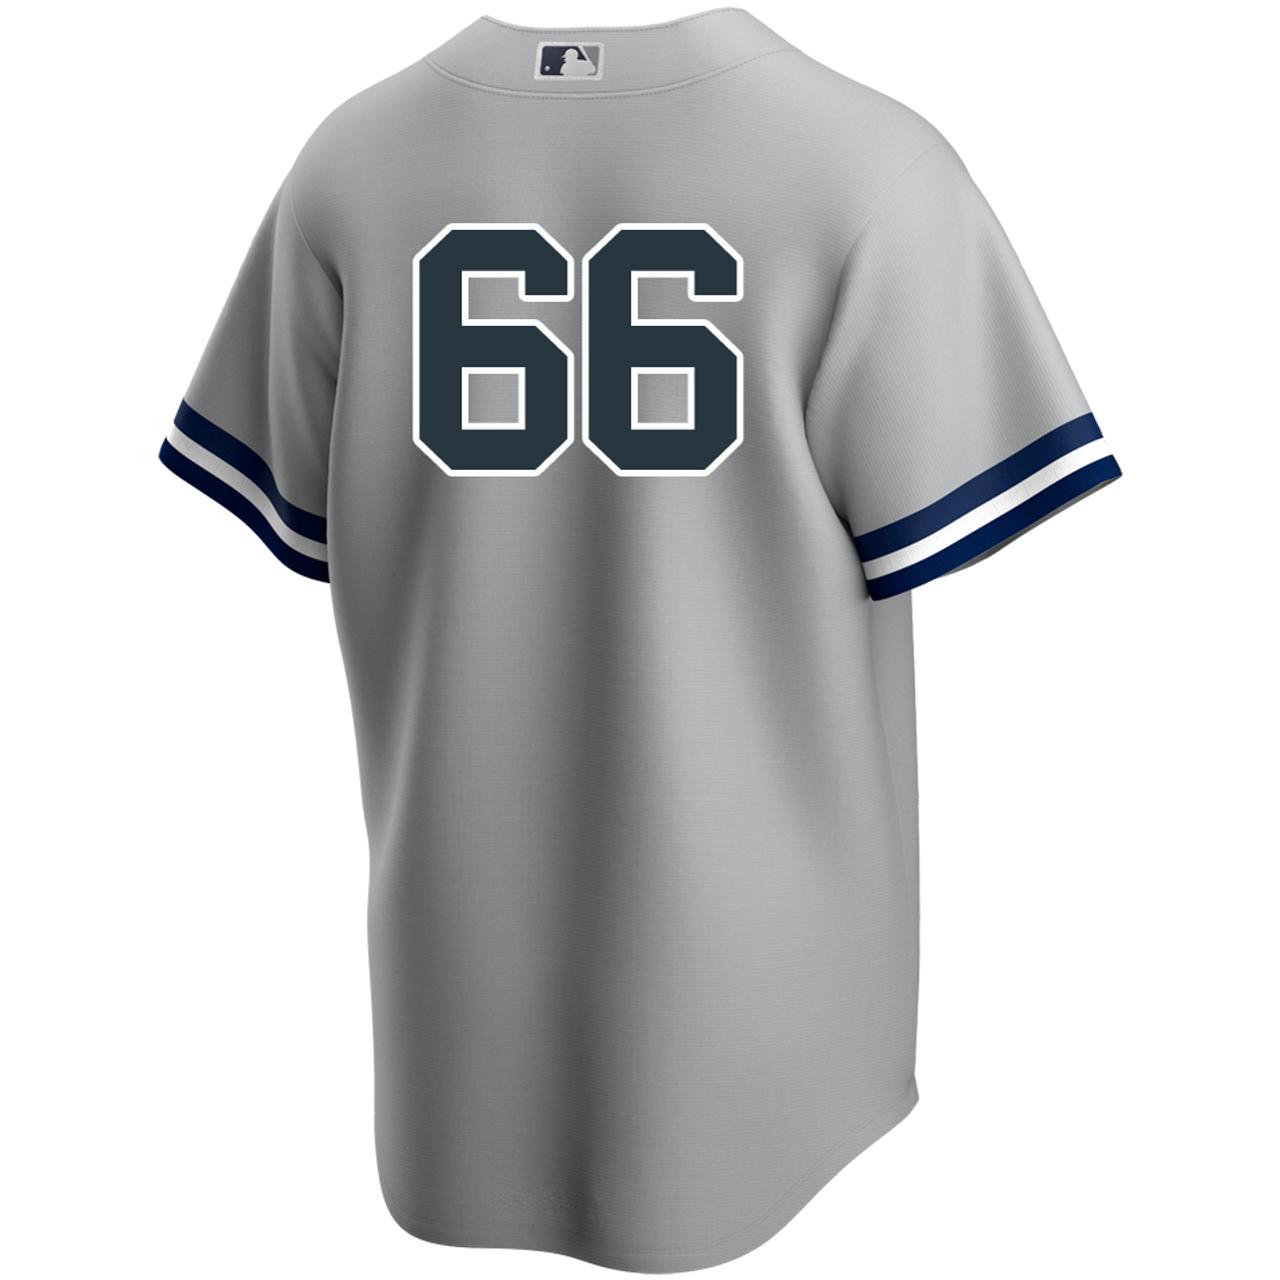 Kyle Higashioka No Name Jersey - NY Yankees Number Only Replica Jersey